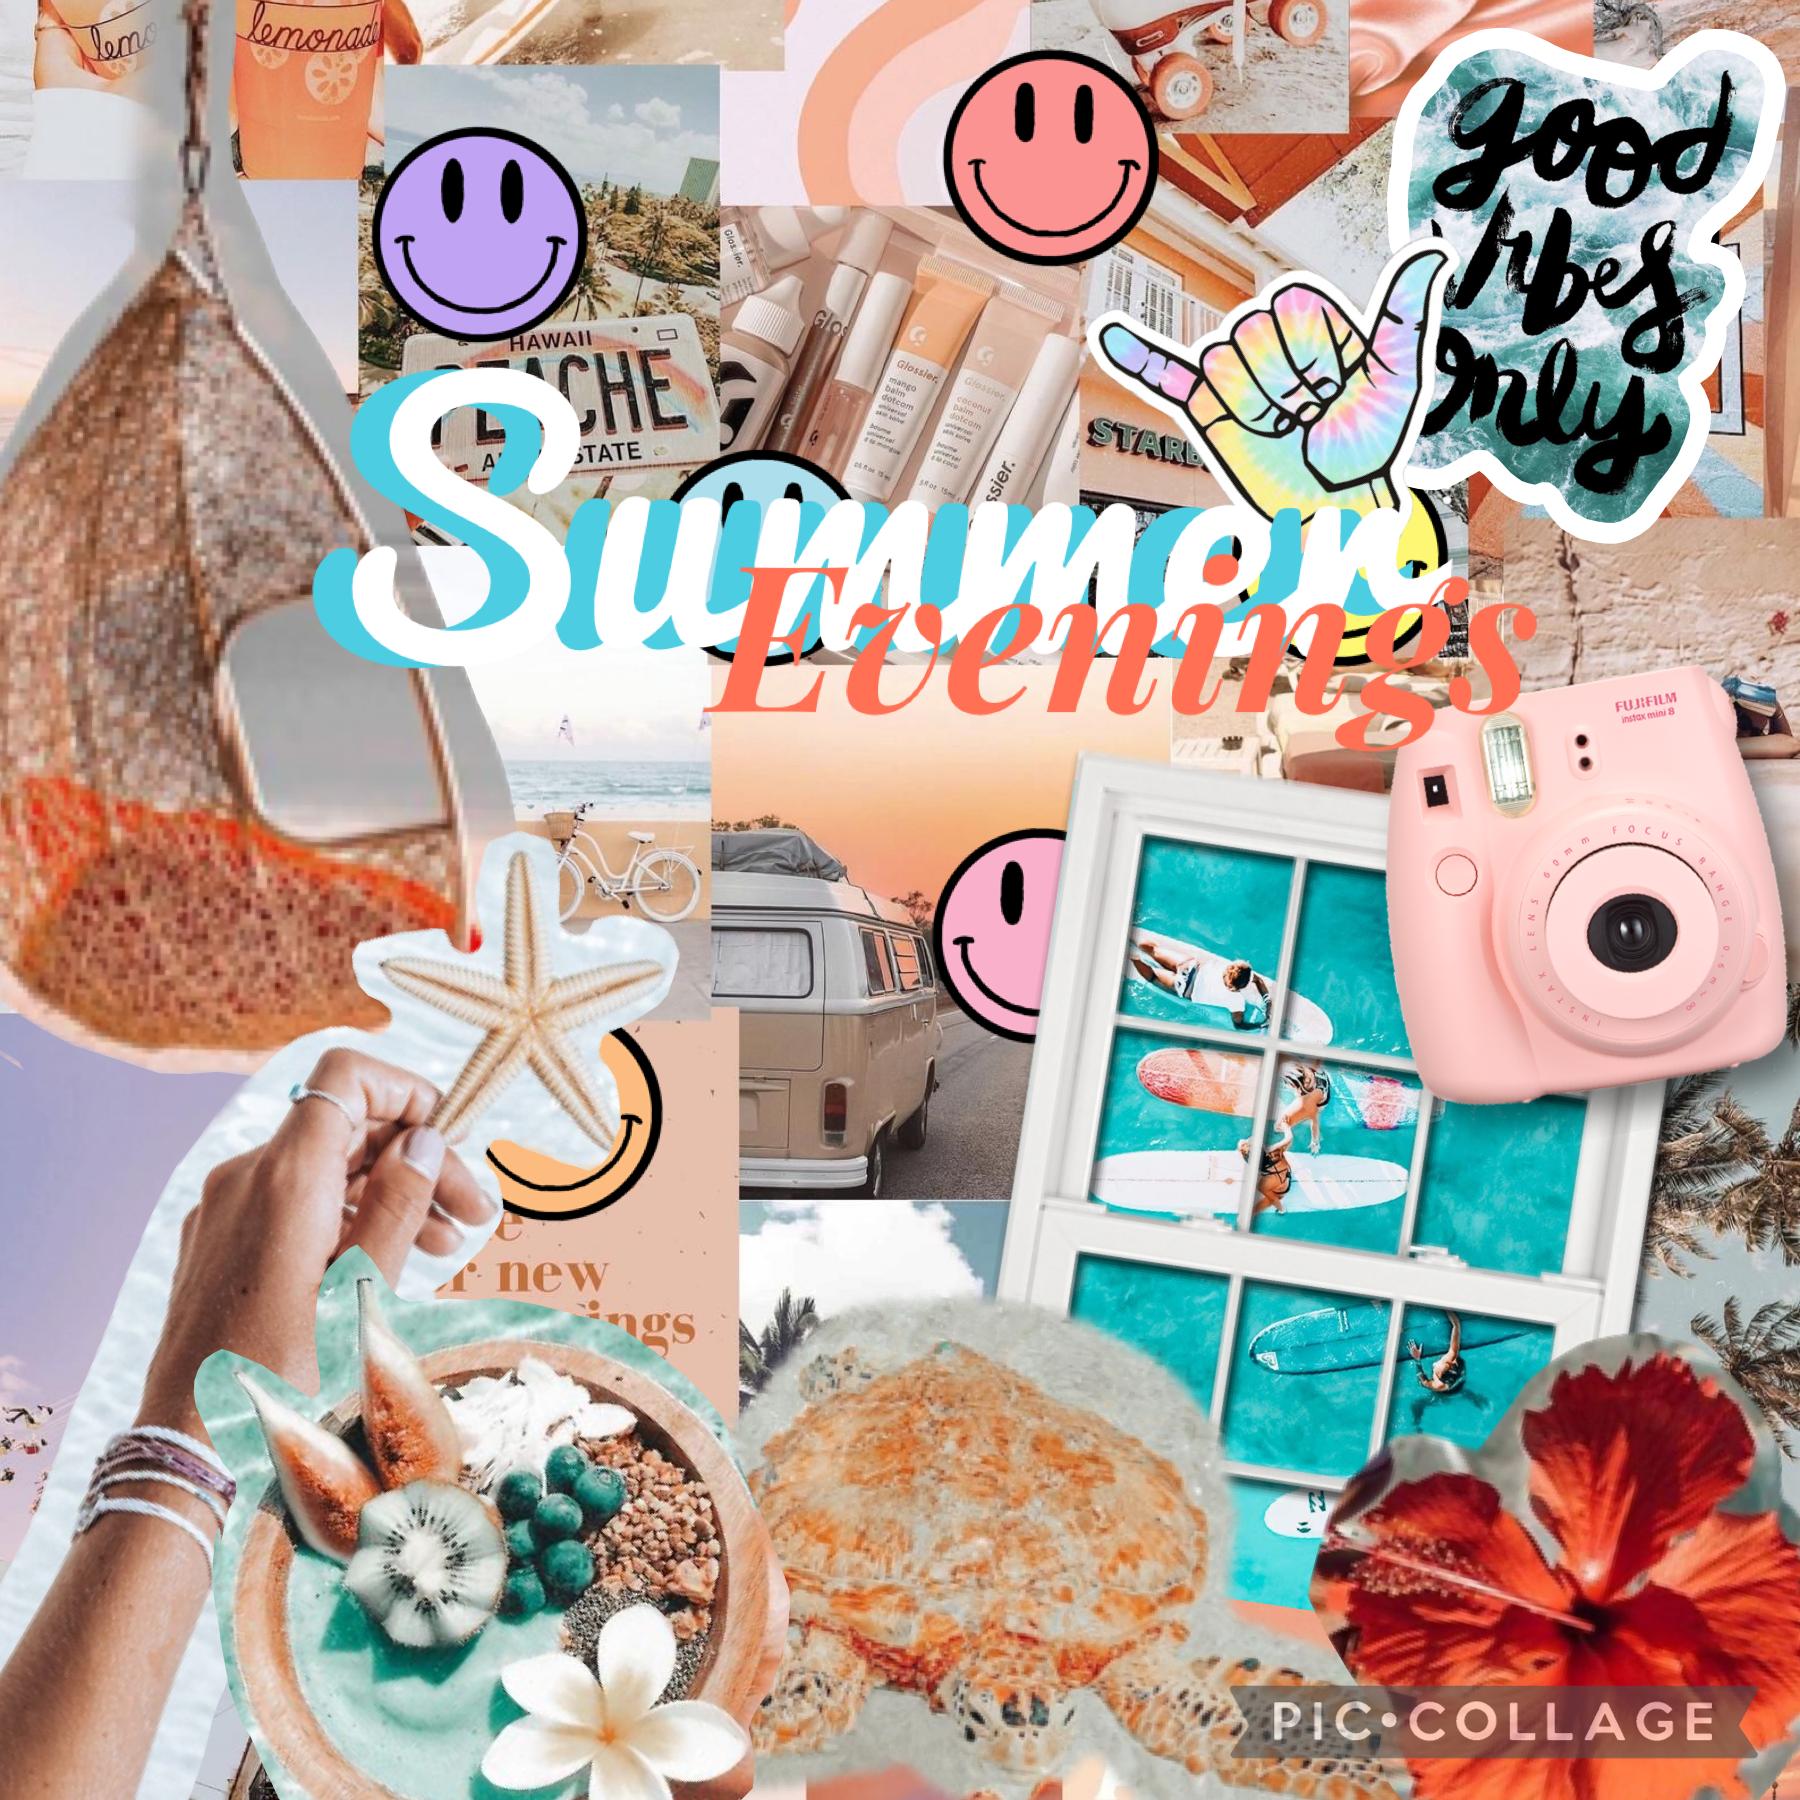 🌺🫧tap🫧🌺
Hey guys! This was supposed to be a complex collage,as you can see that in the bg,but then in the middle of the adding the text pic collage crashed🫠
Full quote-those perfect summer evenings- 